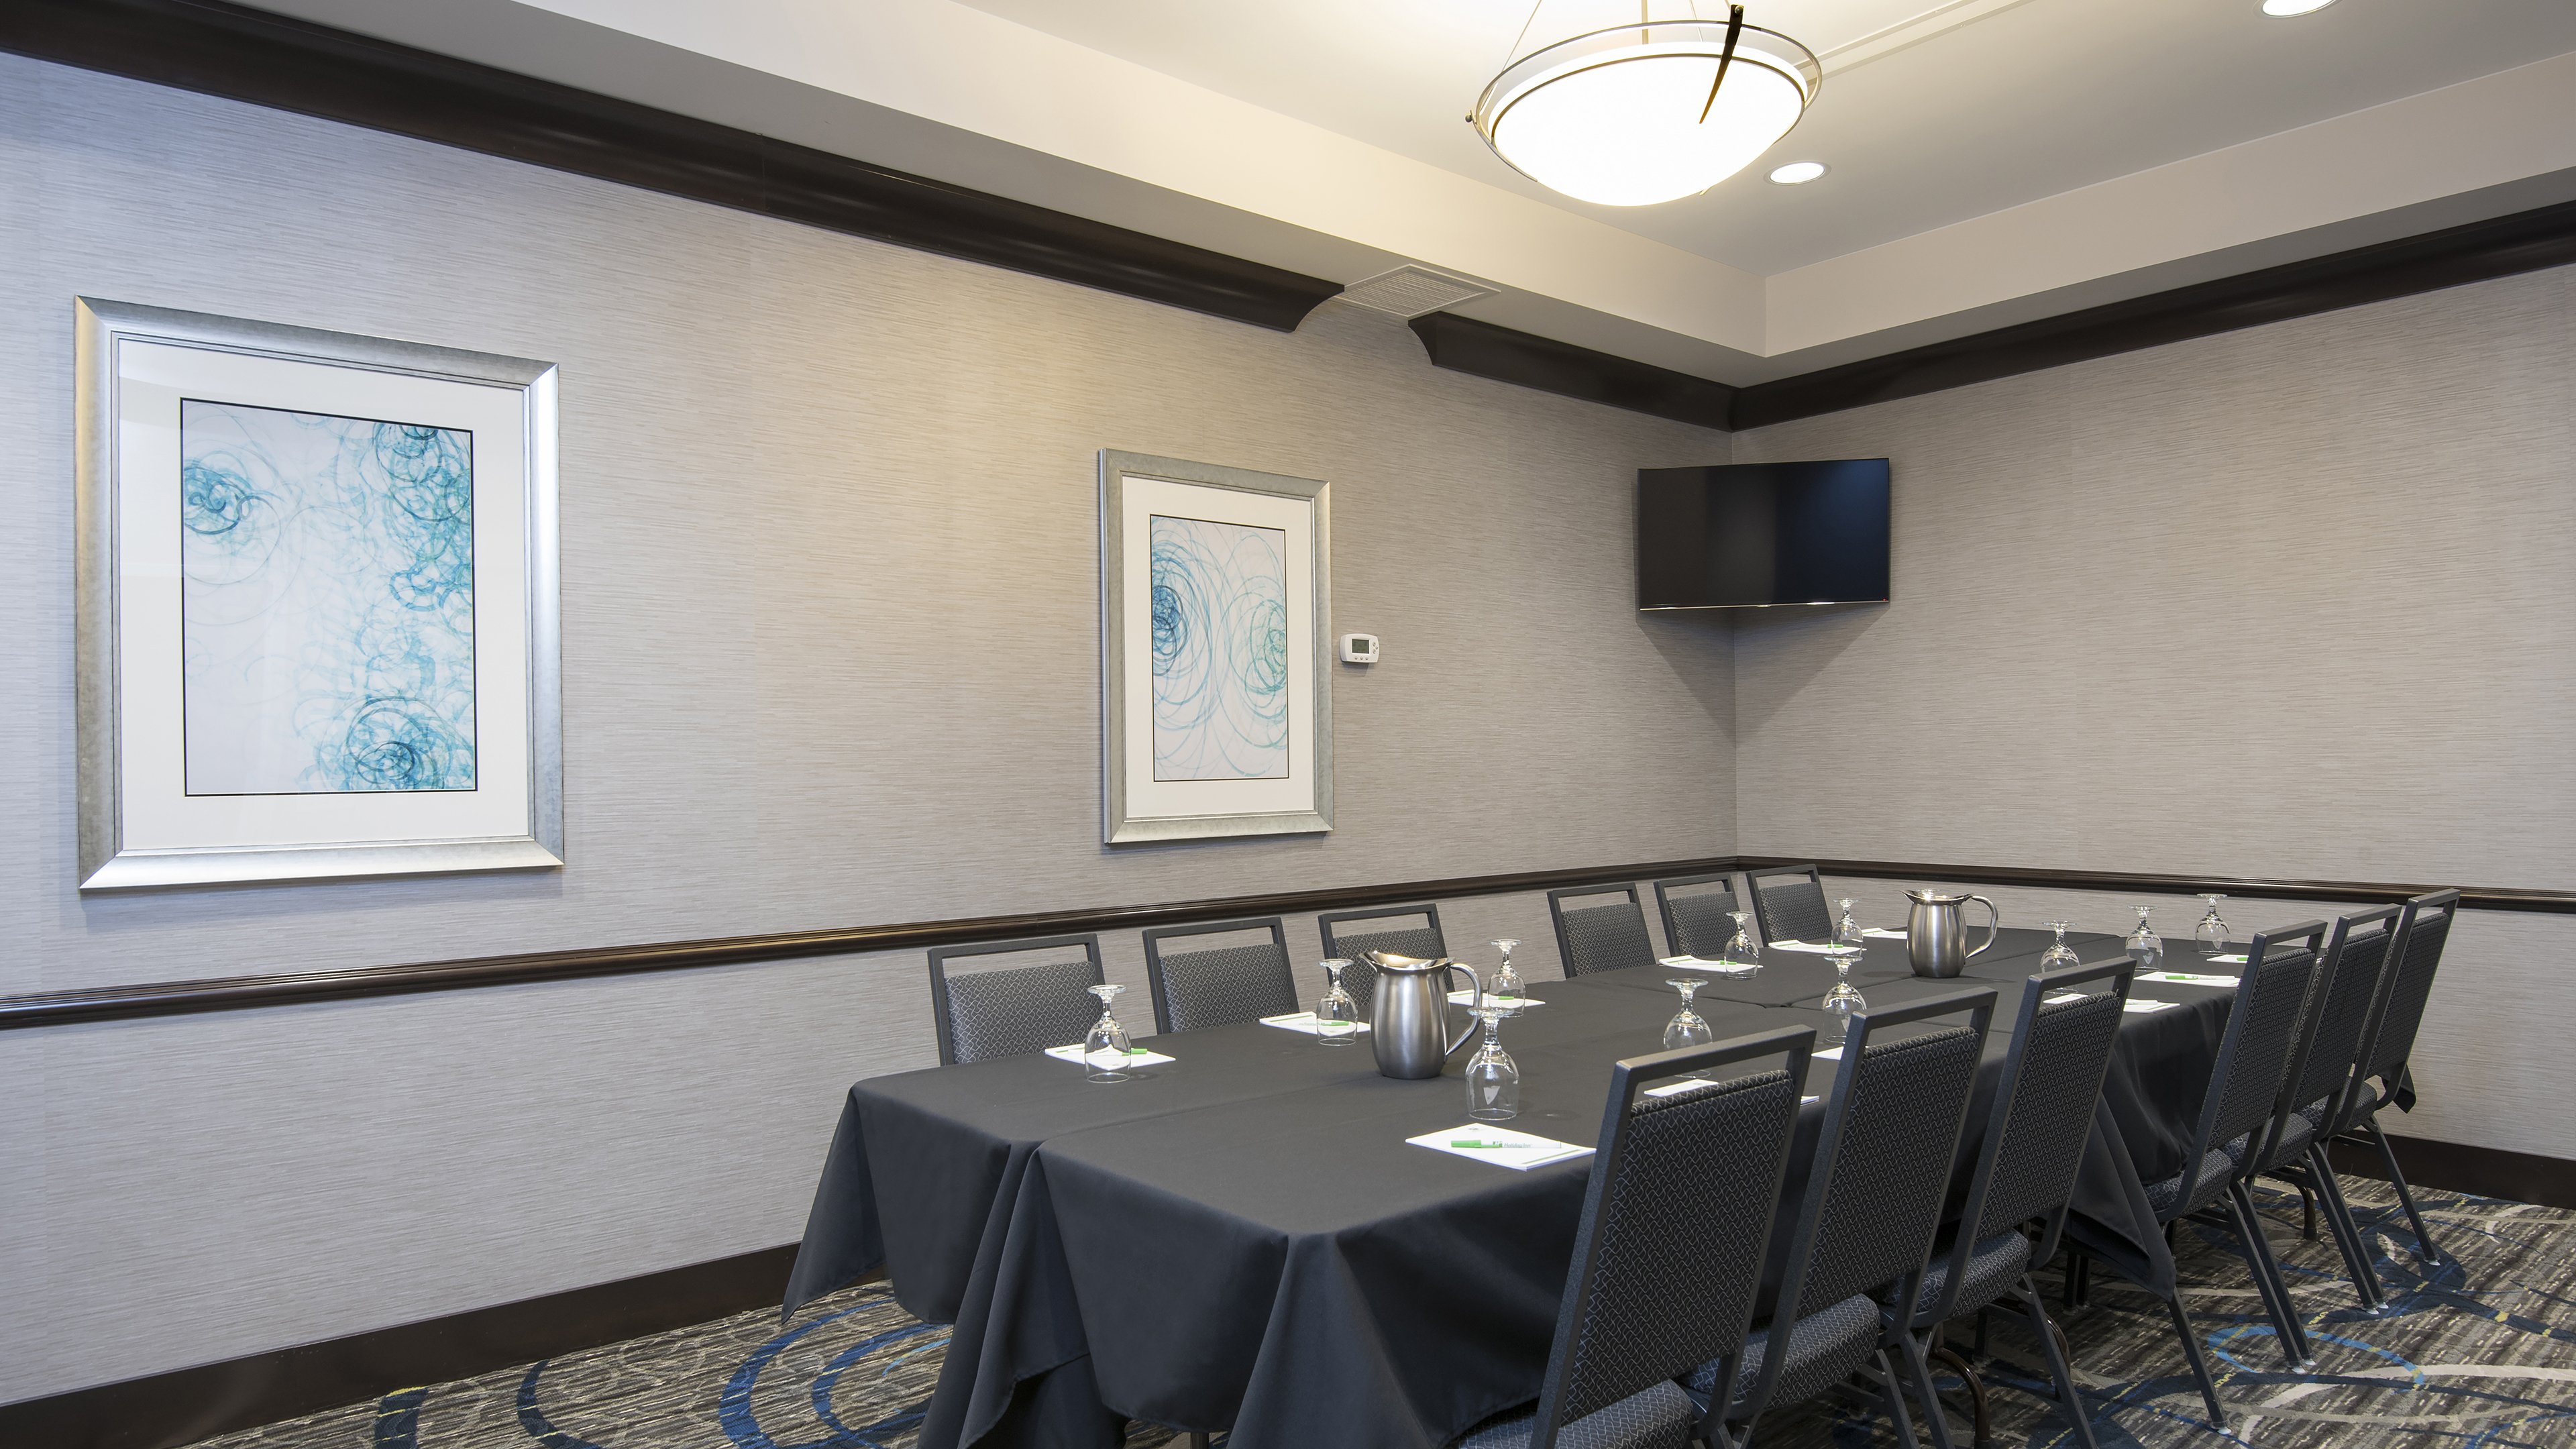 Breakout Room, perfect for smaller meetings.